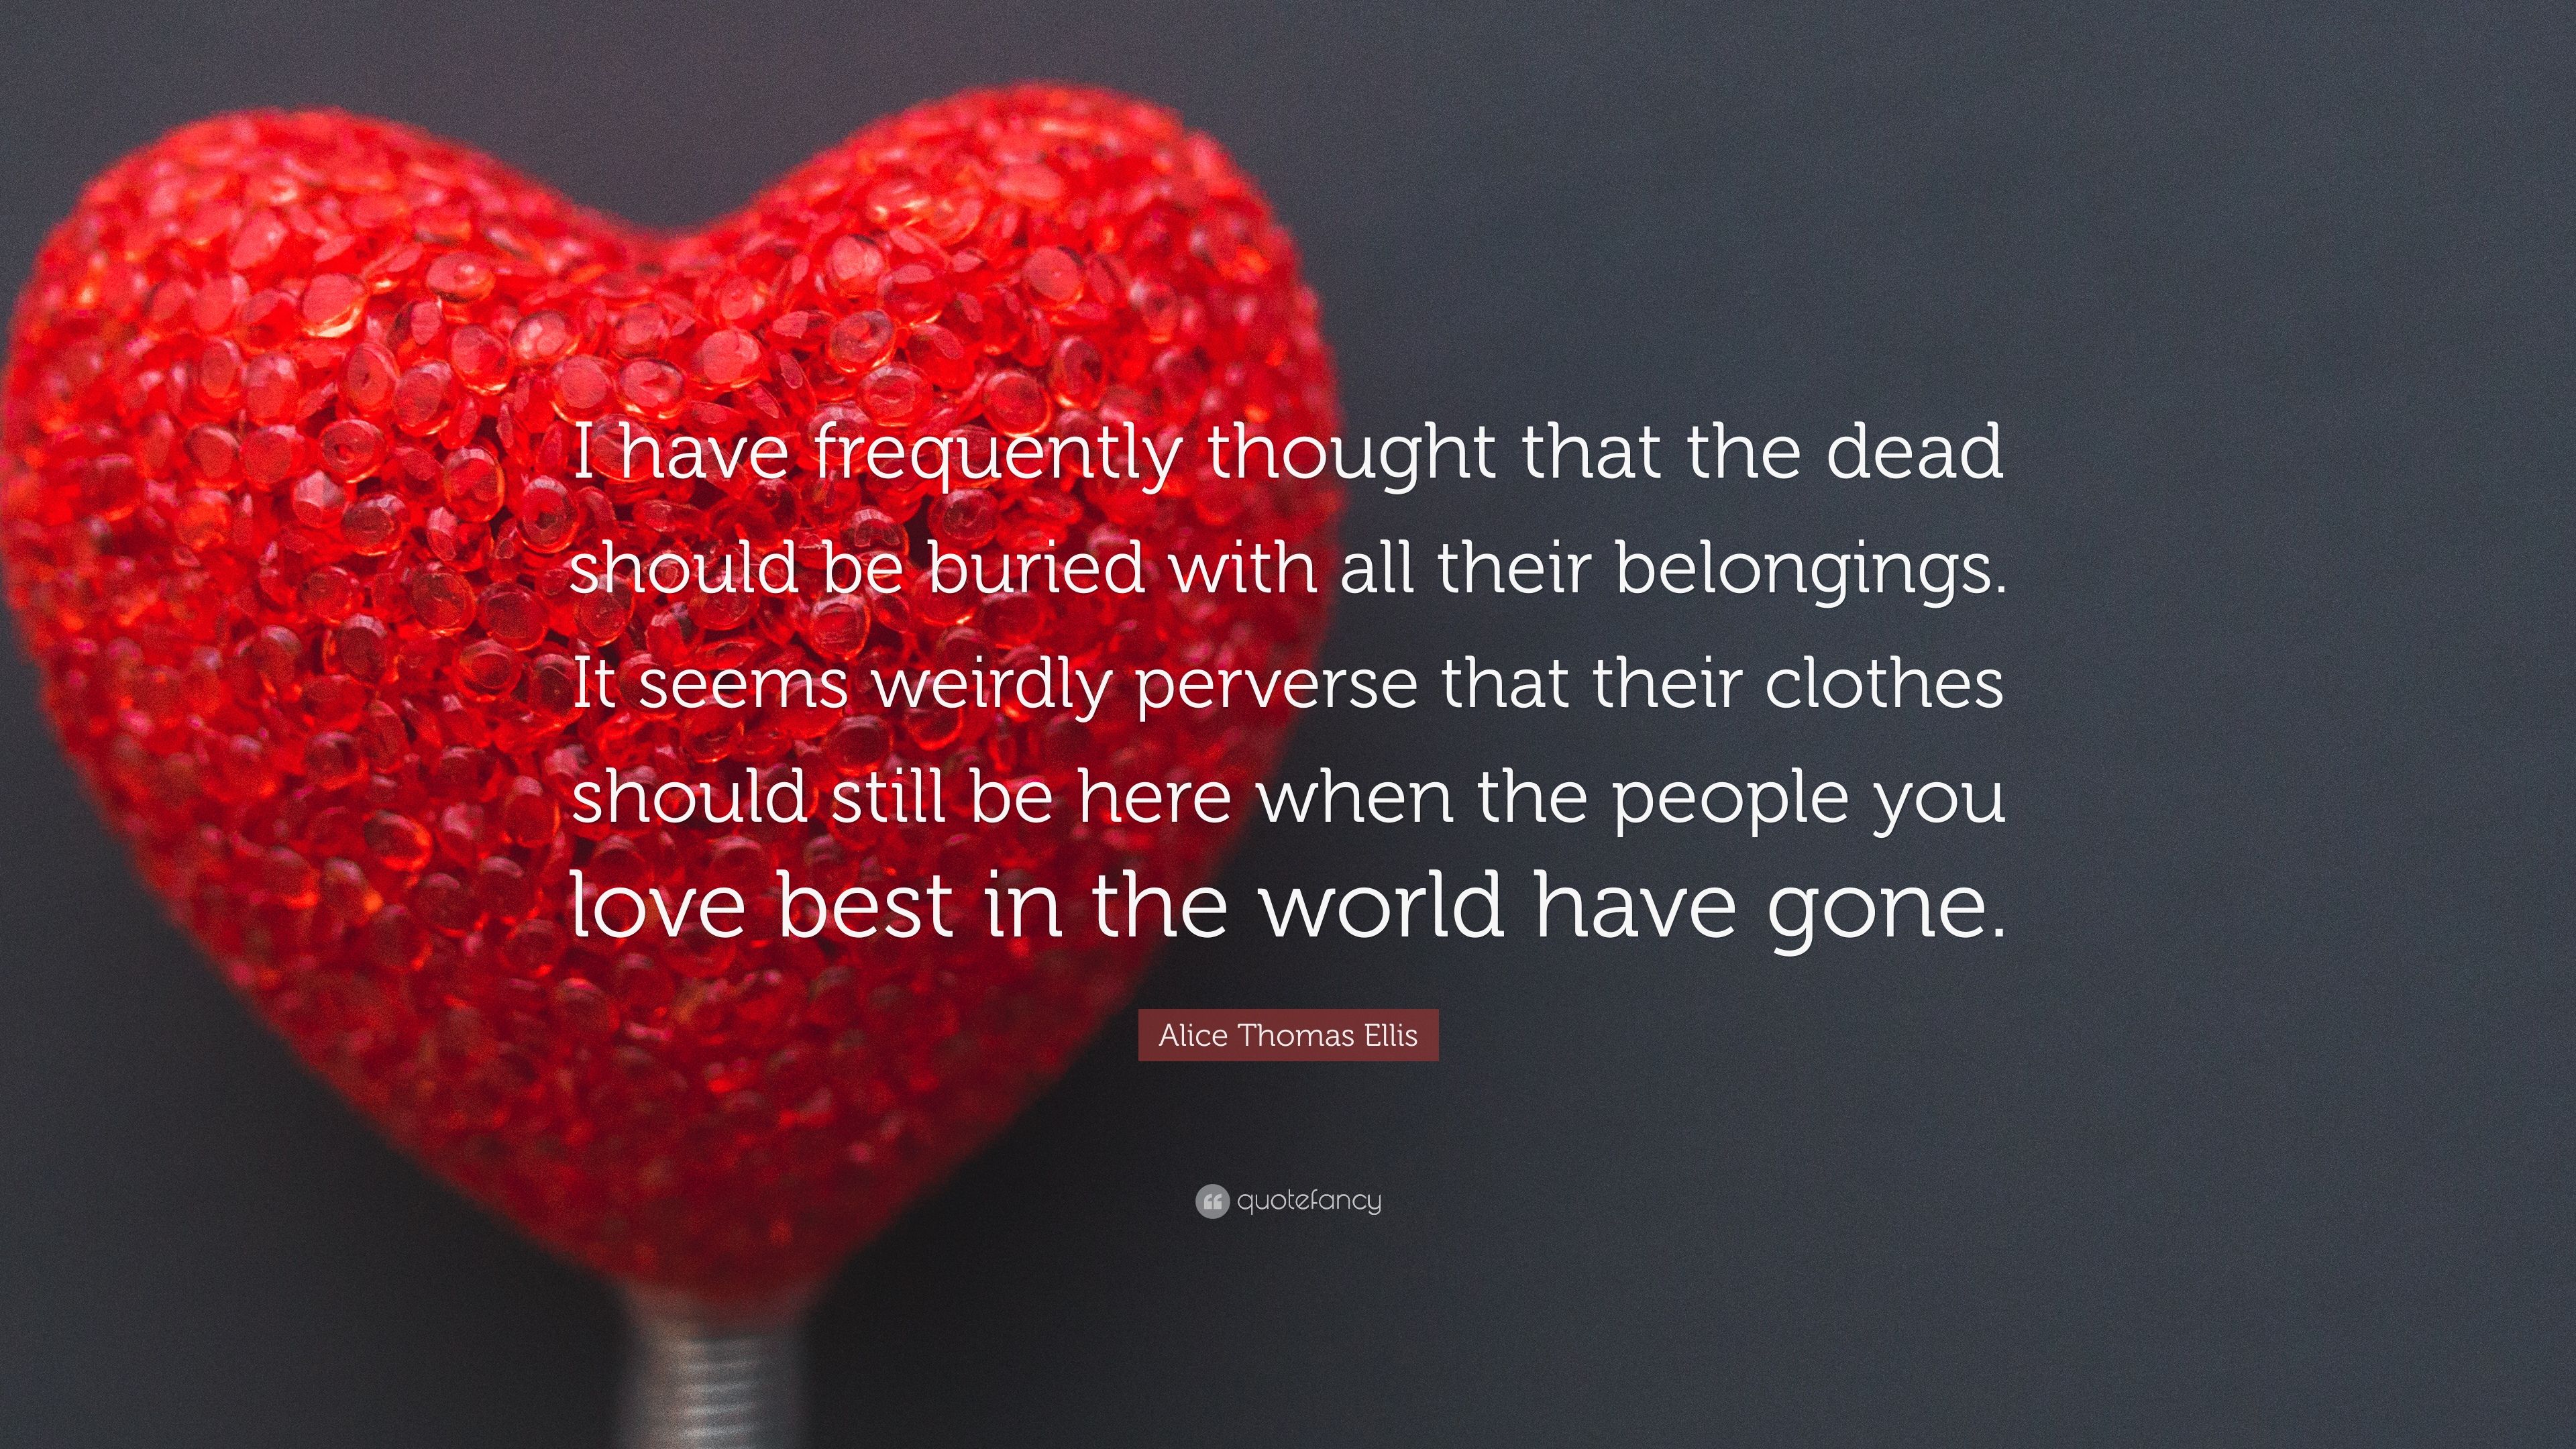 Alice Thomas Ellis Quote: “I have frequently thought that the dead